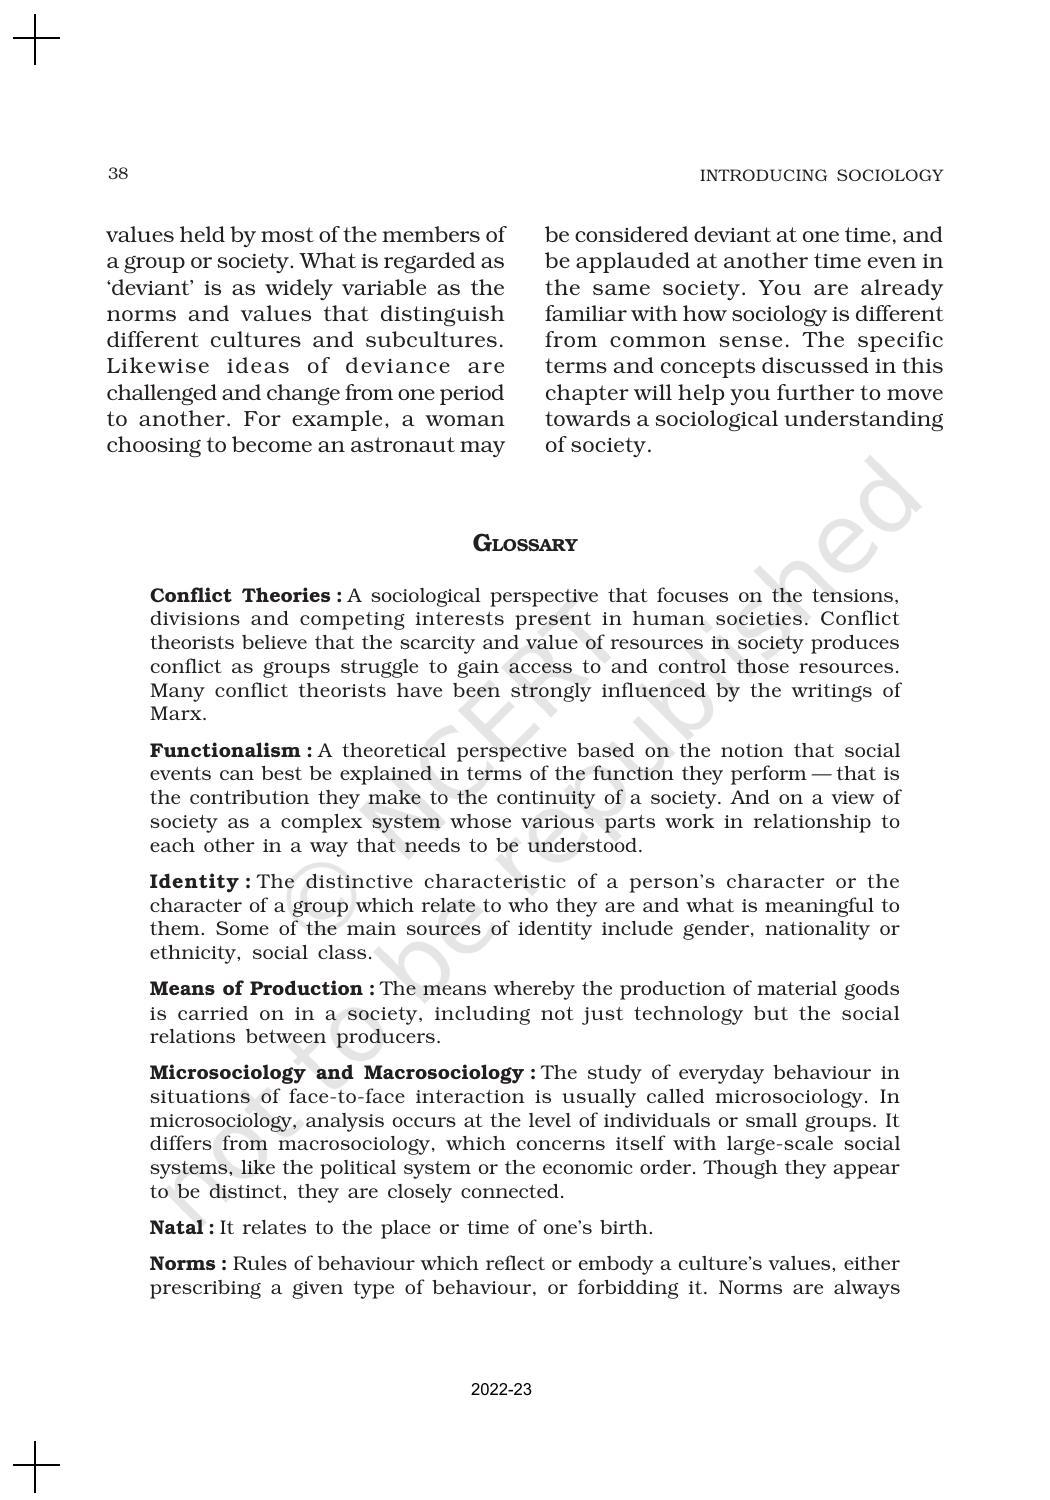 NCERT Book for Class 11 Sociology (Part-I) Chapter 2 Terms, Concepts and Their Use in Sociology - Page 15